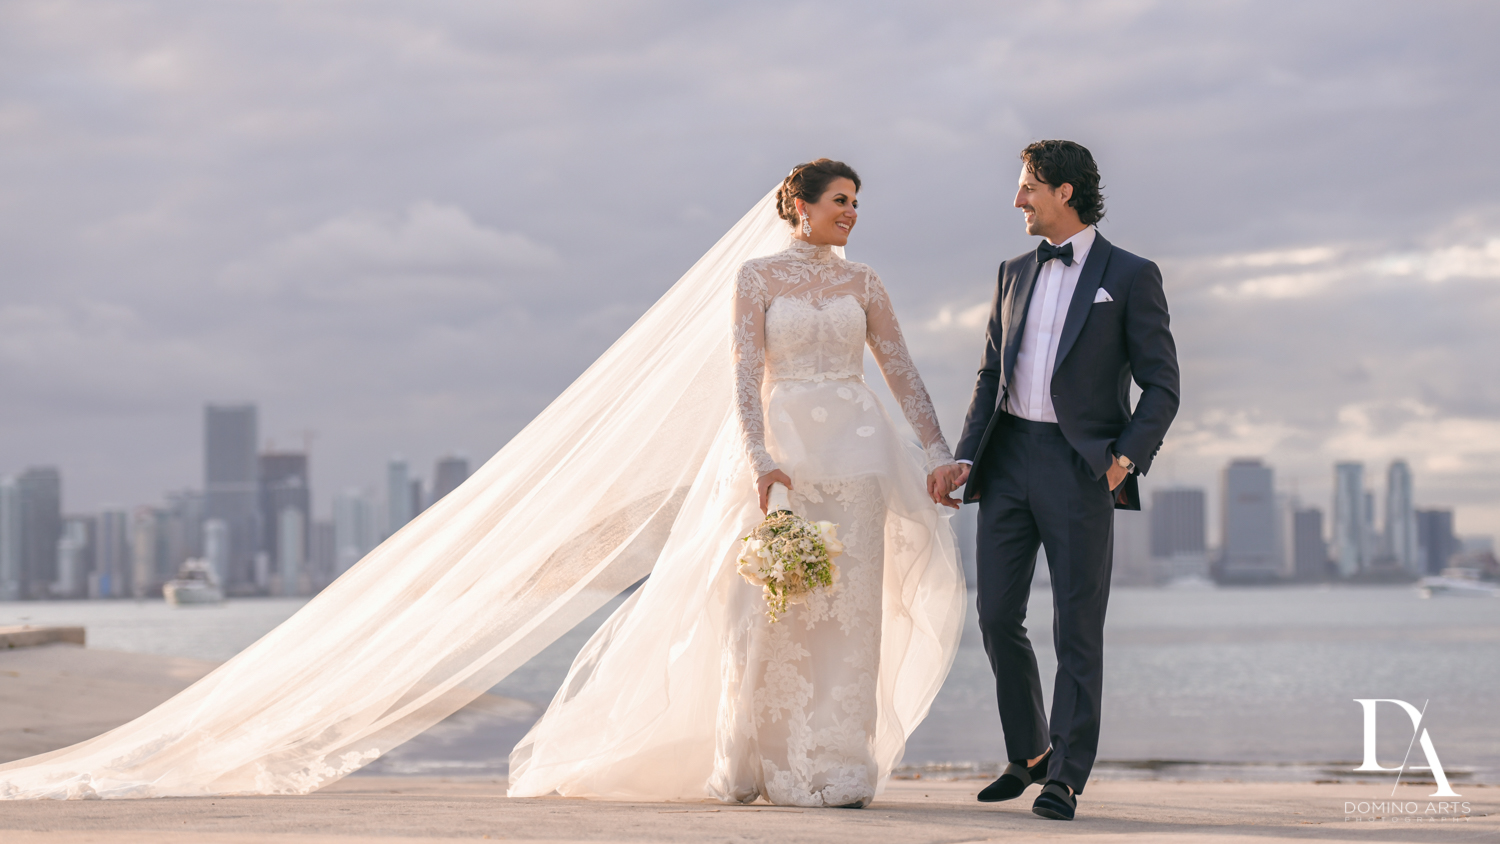 miami skyline at Luxurious Destination Wedding at Fisher Island Miami by Domino Arts Photography